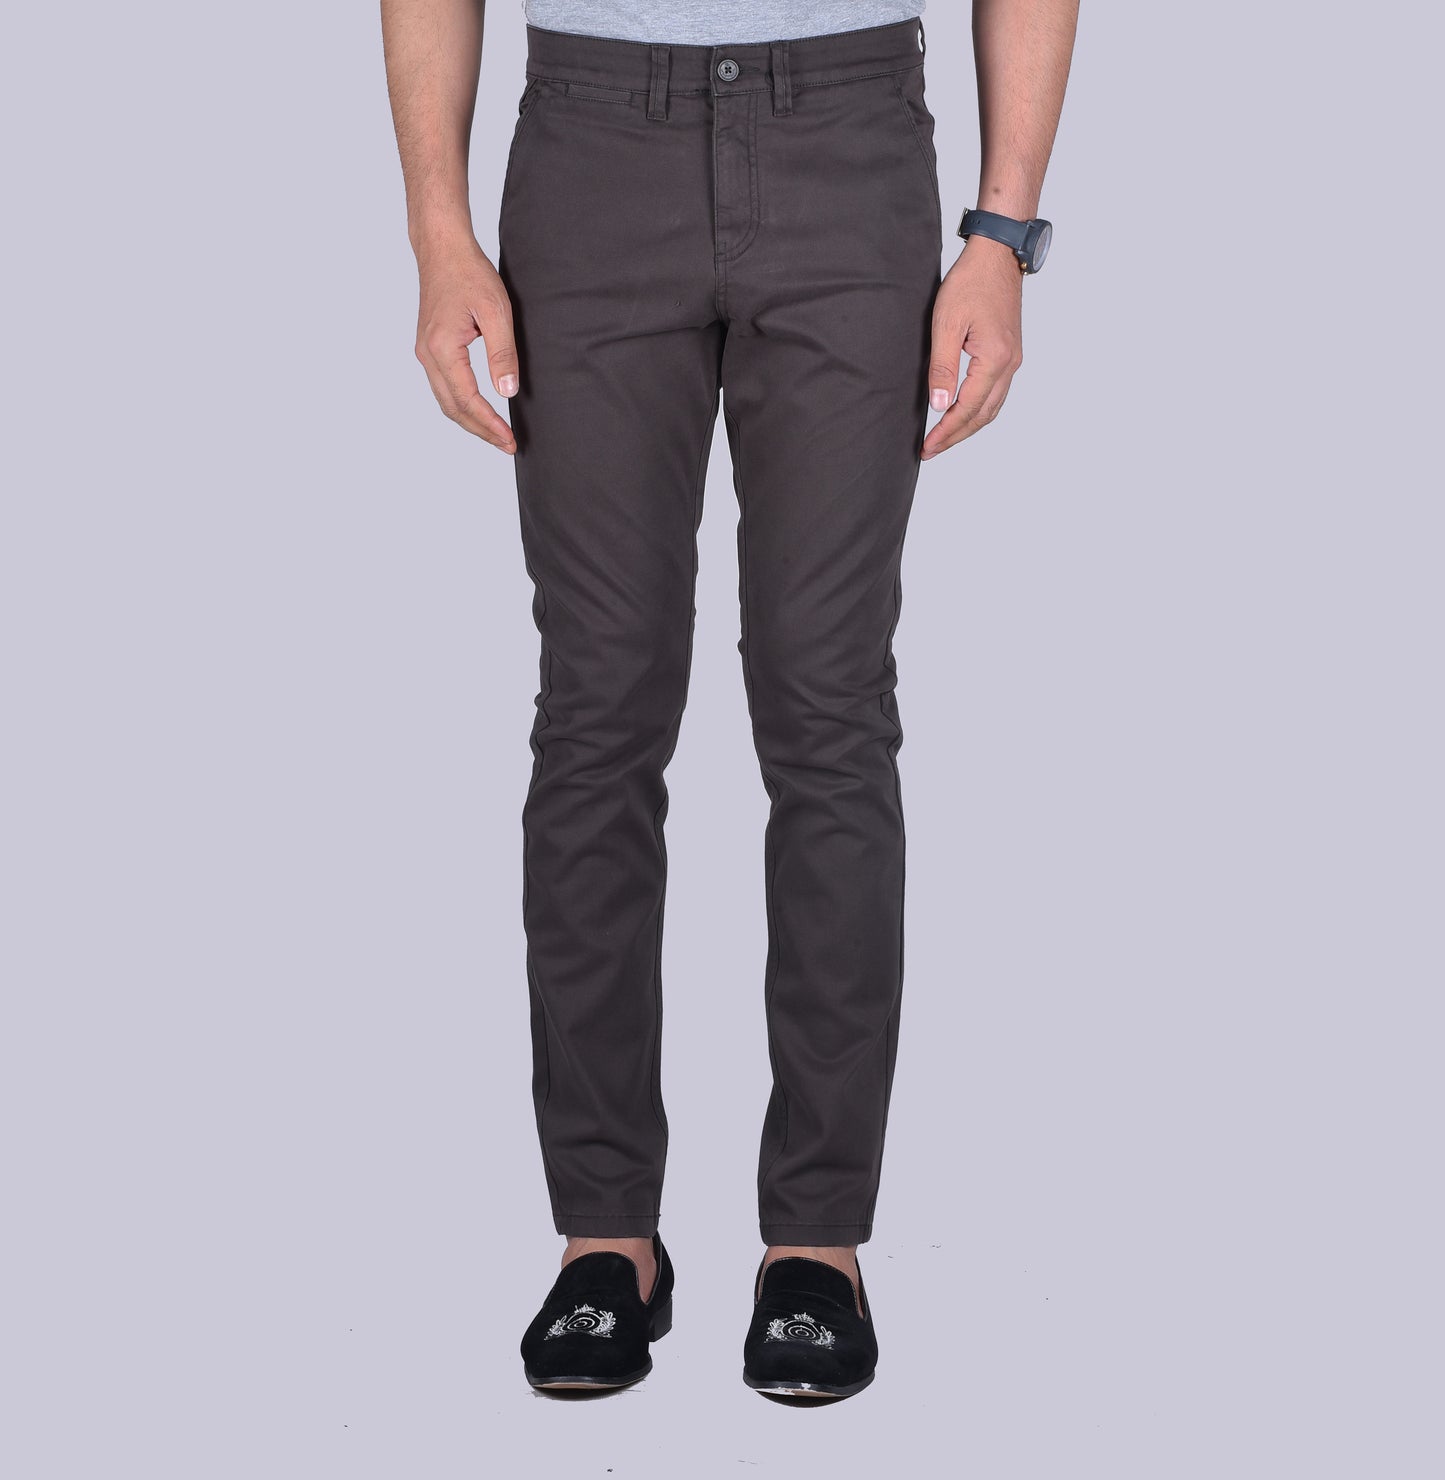 Dark grey contour fit trousers. - urban clothing co.